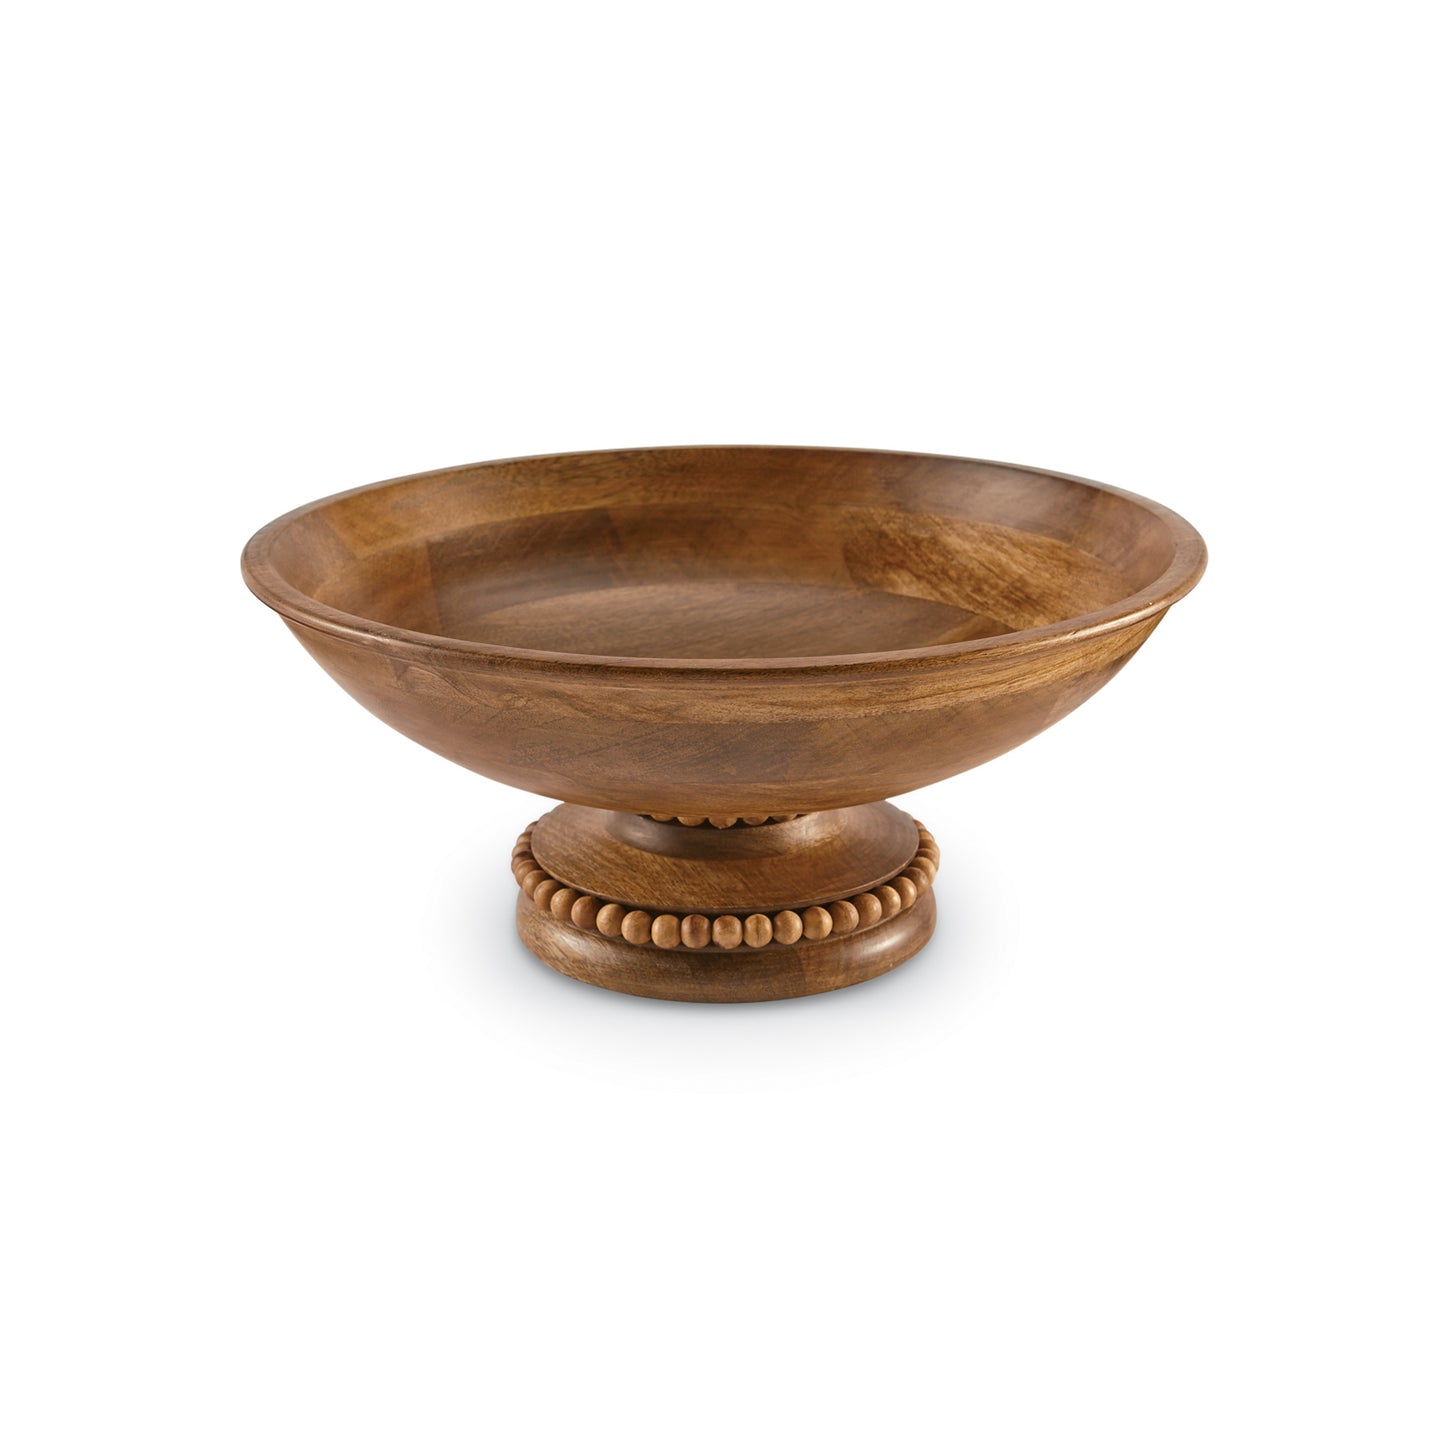 wooden bowl on a pedestal the has a bead rim.